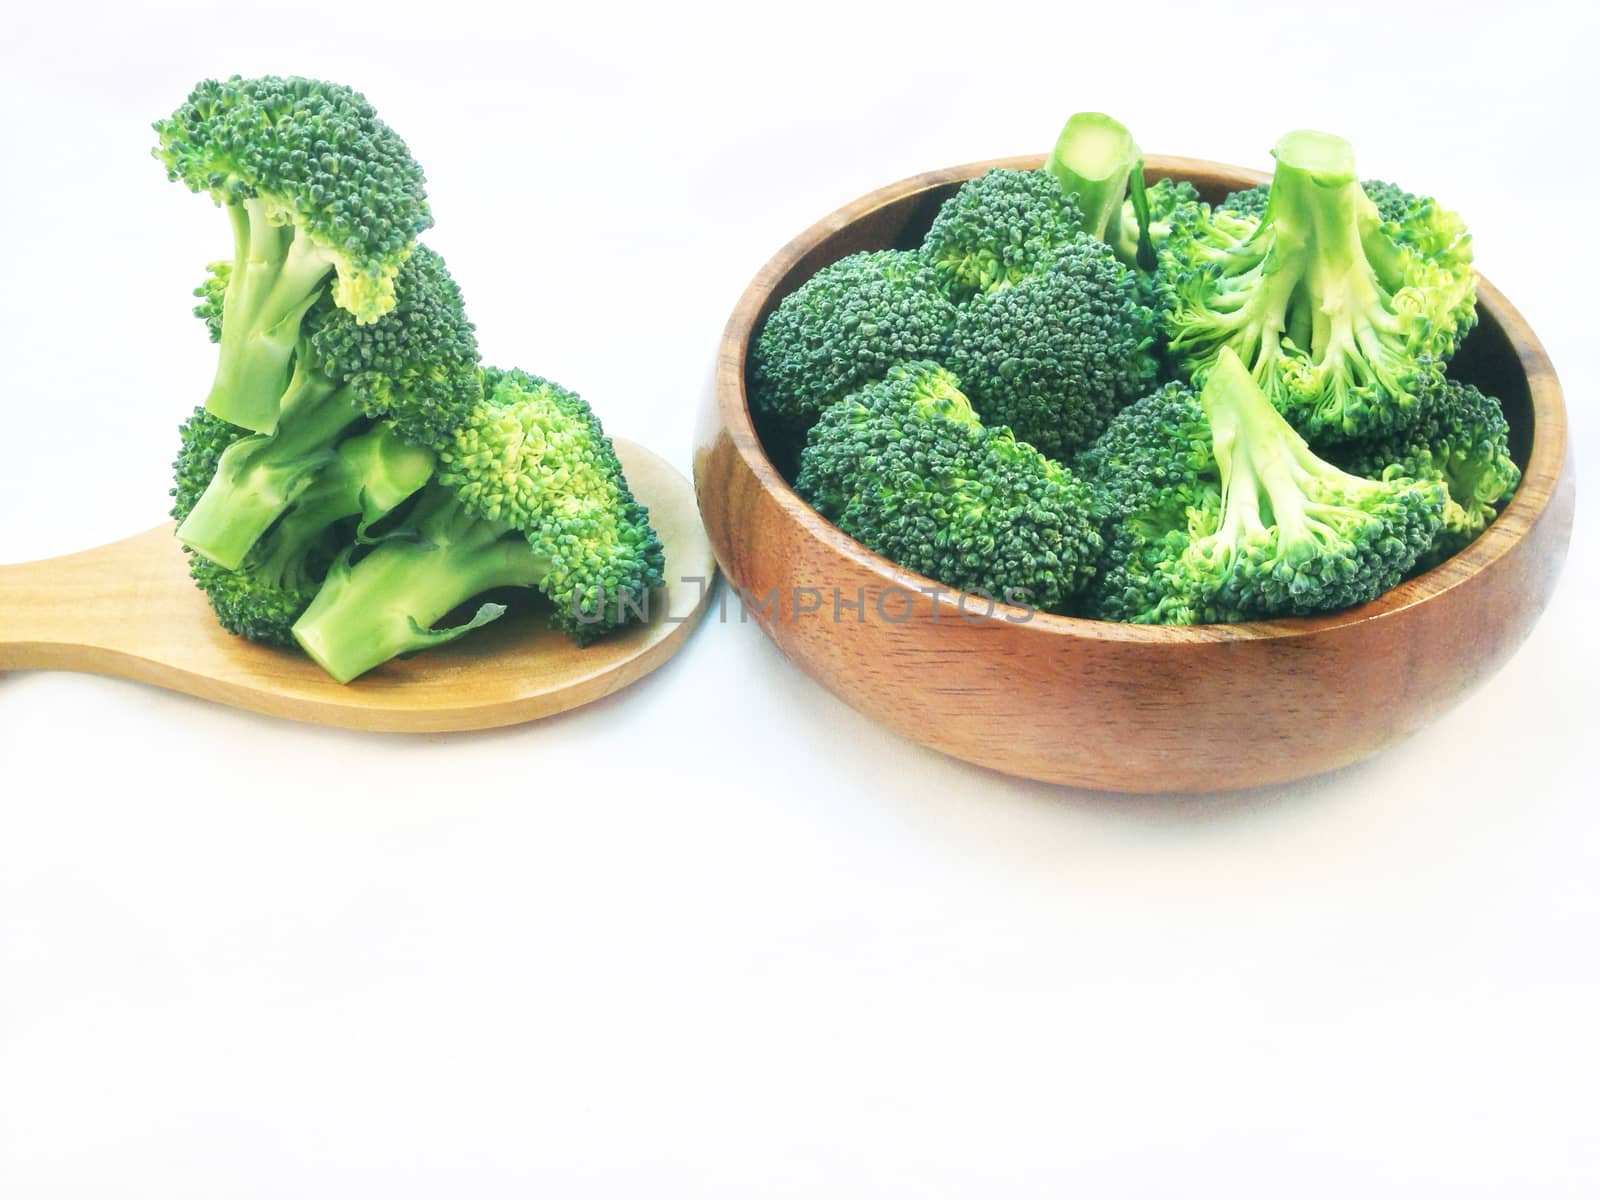 Broccoli in wooden bowl and wooden spoon on white background